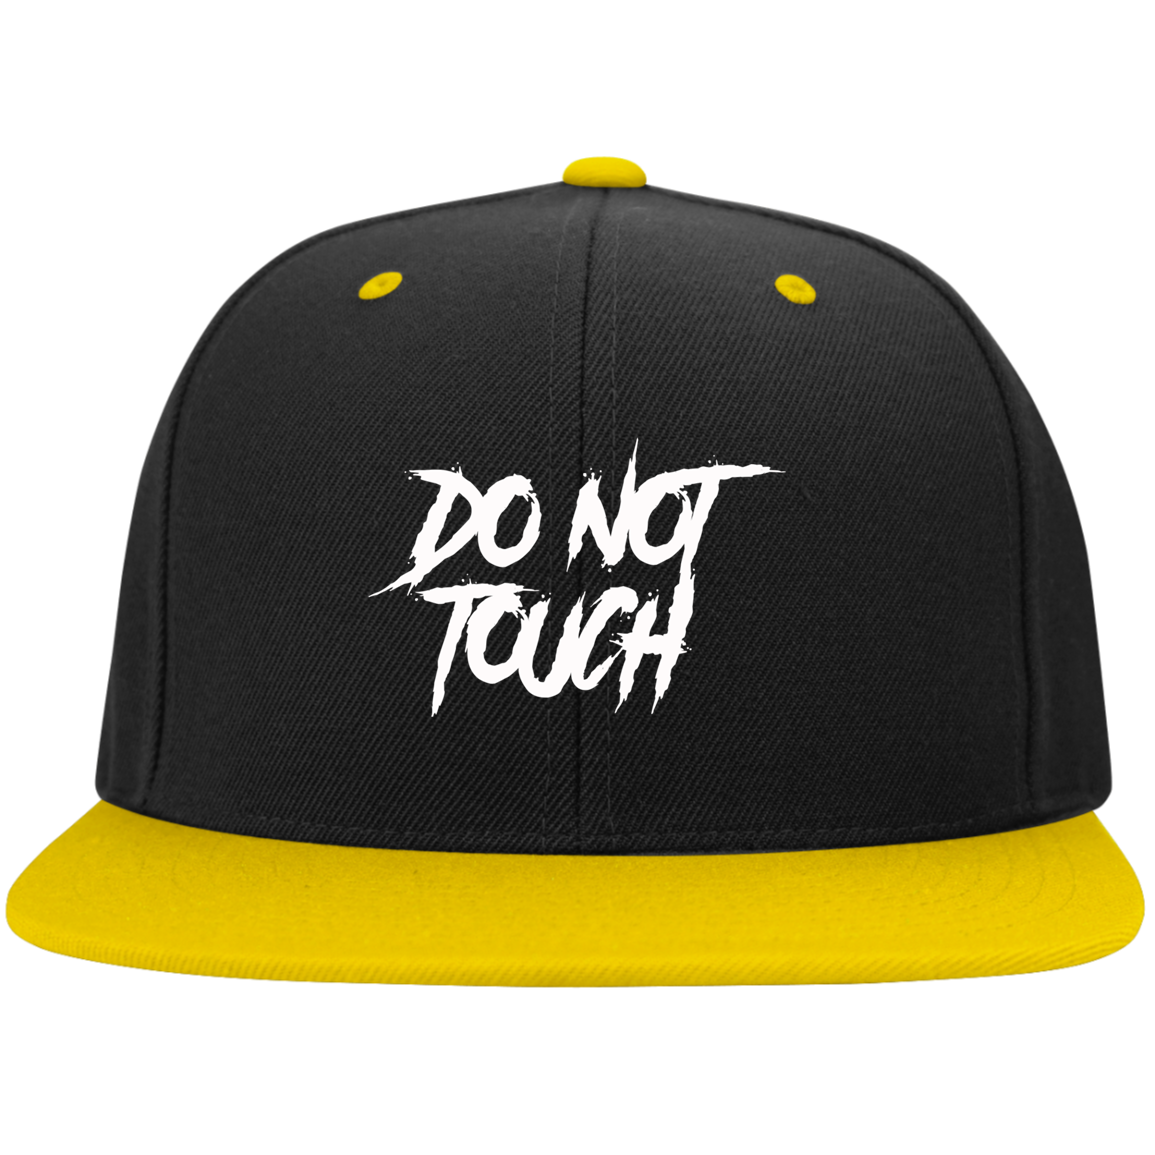 DO NOT TOUCH High-Profile Snapback Hat